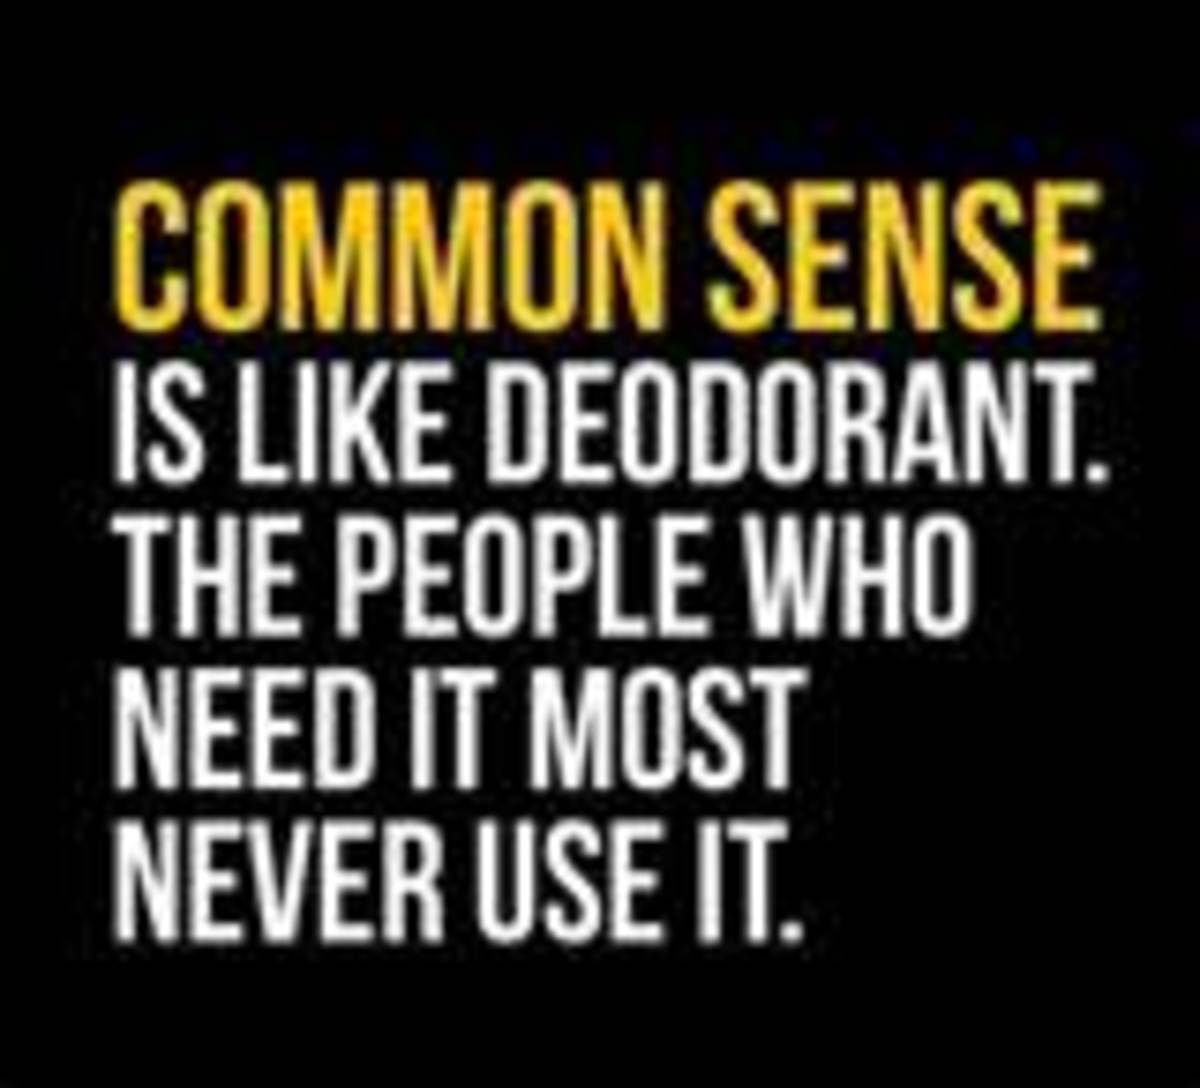 funniest-quotes-ever-funny-quotes-top-funniest-quotes